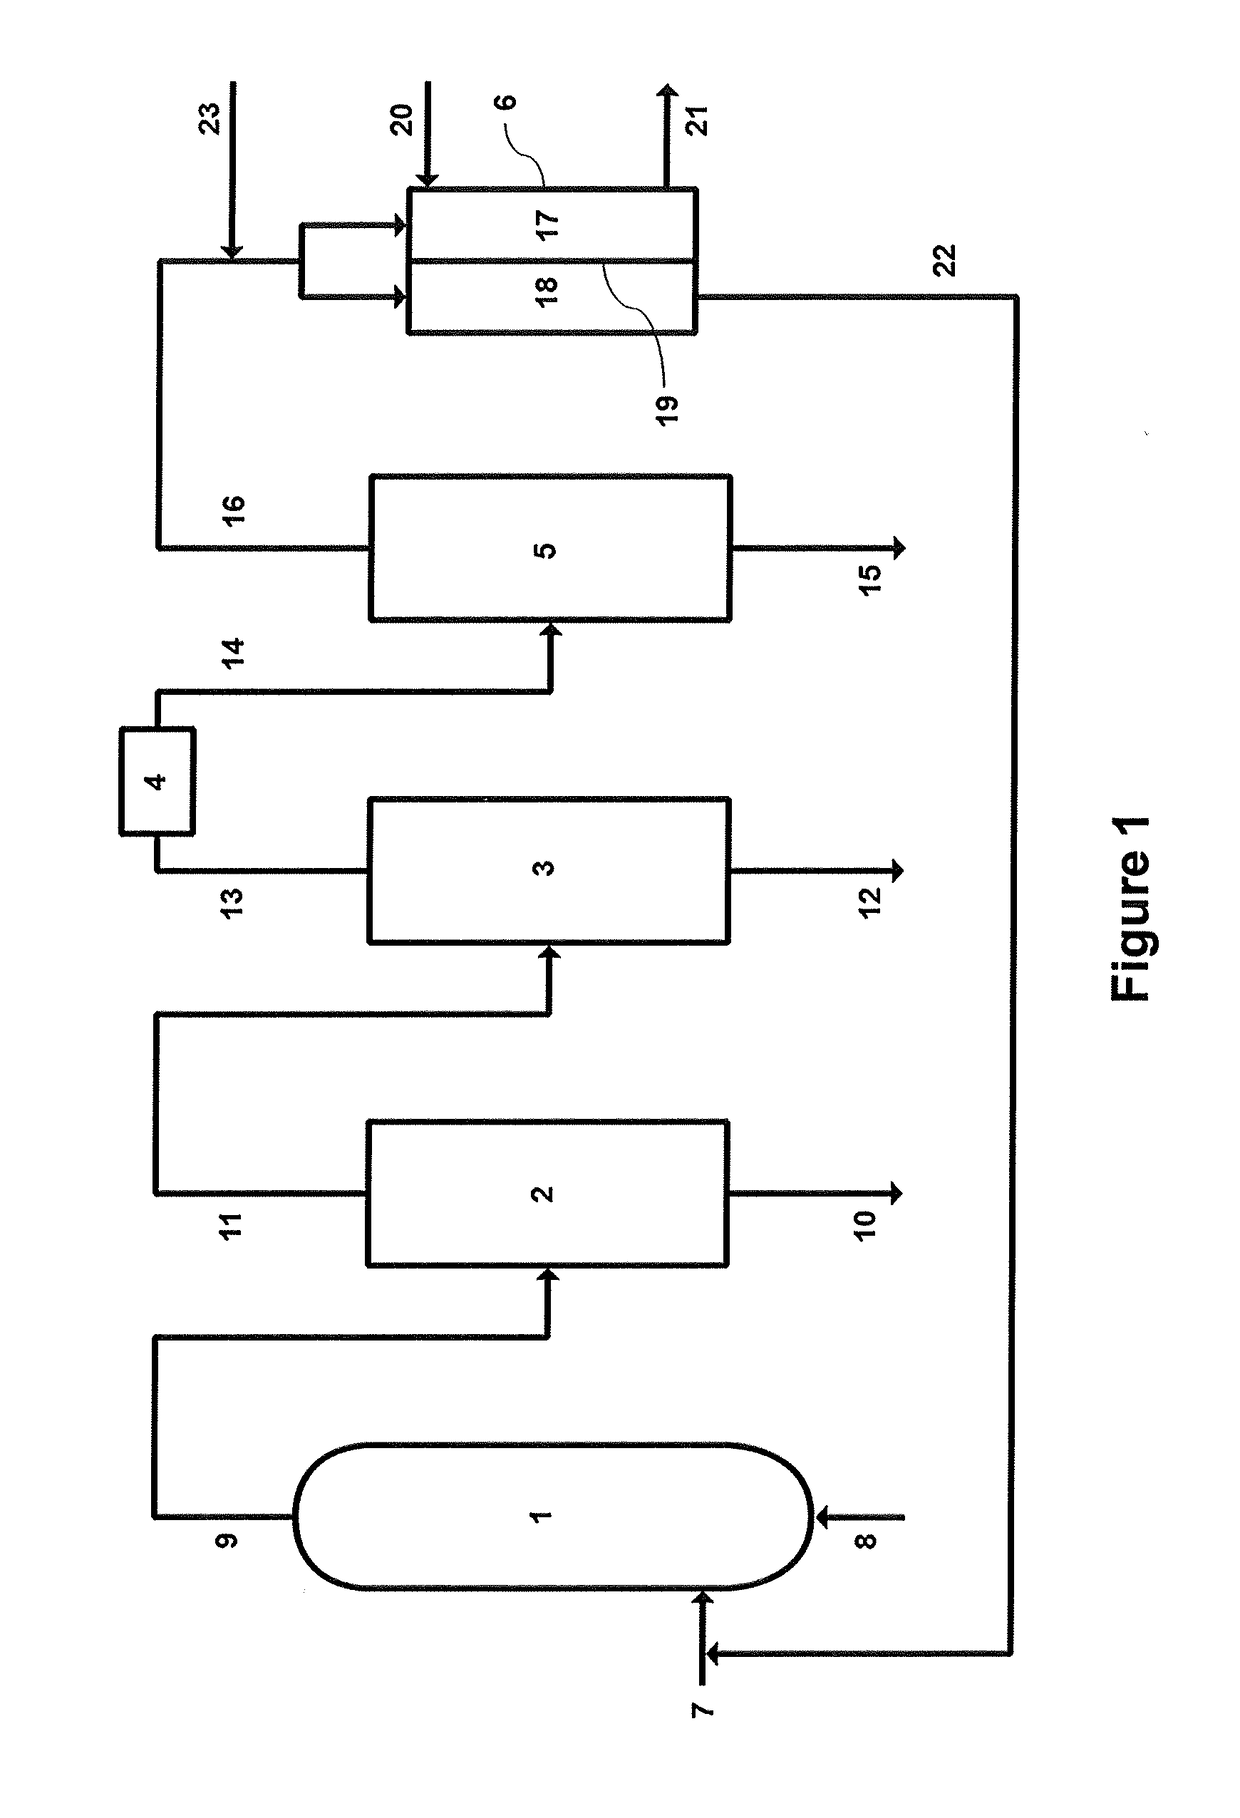 Complex comprising odh unit with integrated oxygen separation module